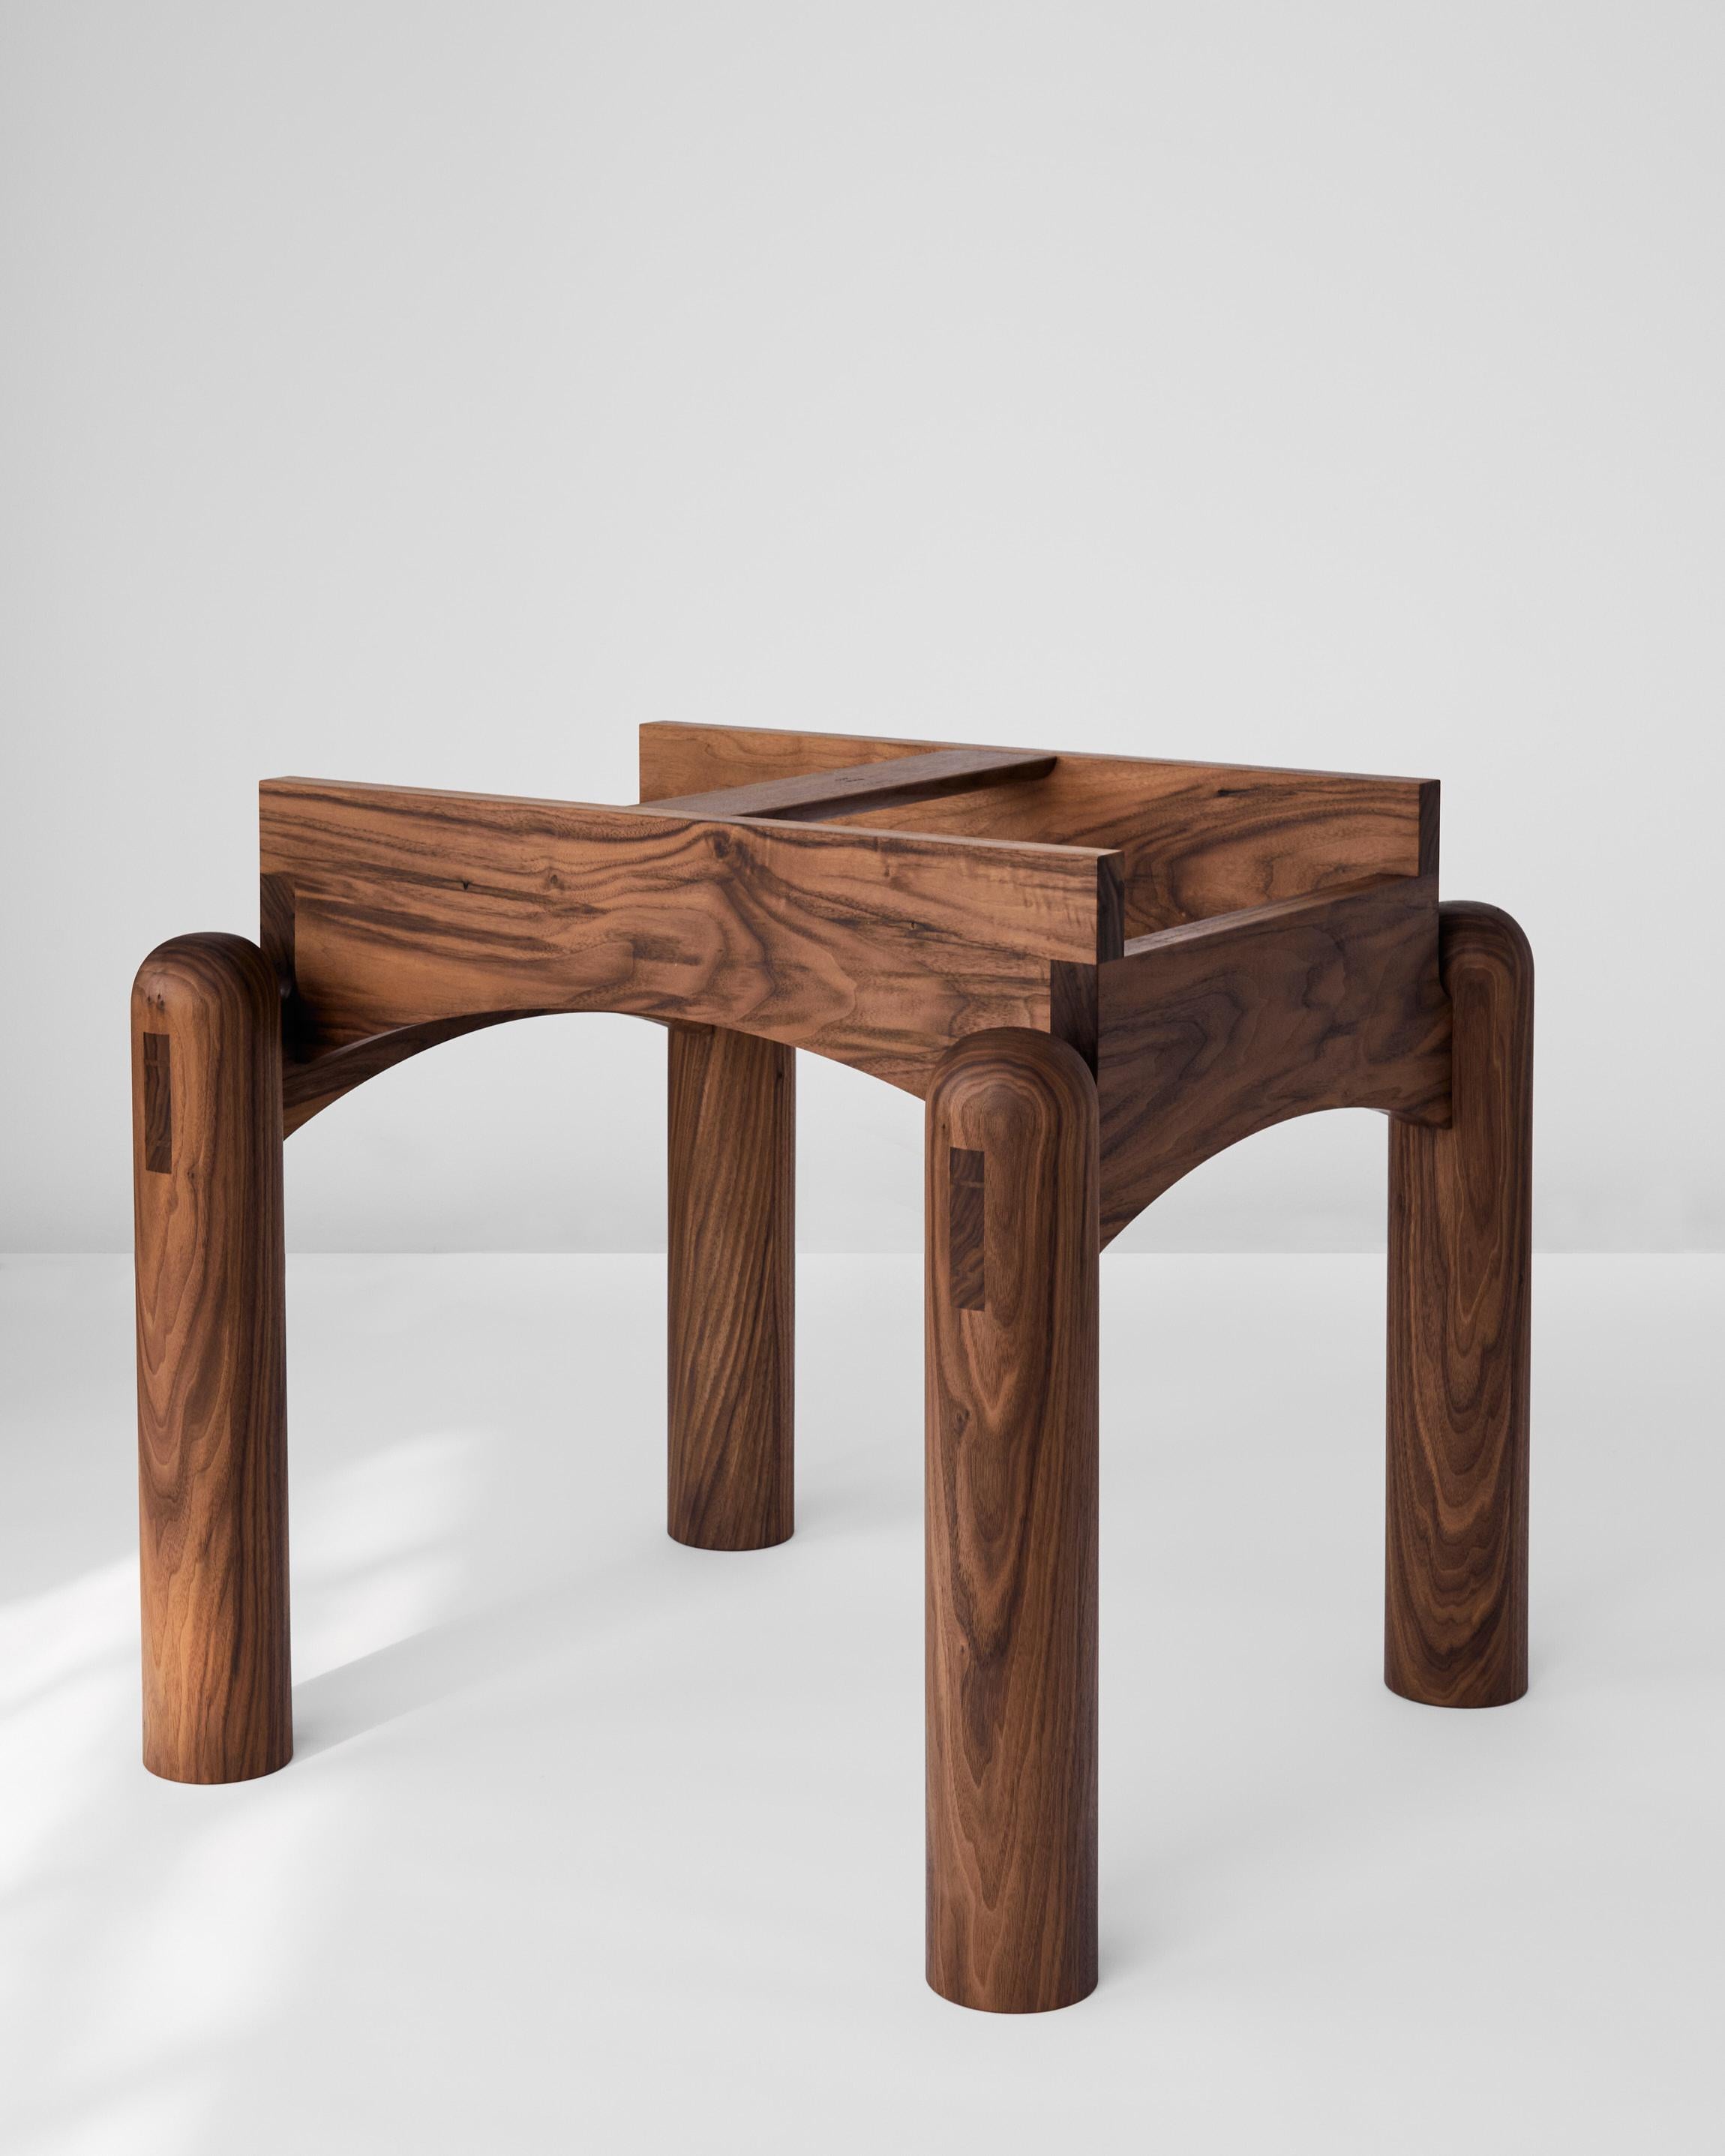 Wood Handmade Nora Dining Table, Extendable Ø150cm  - Walnut - by BACD studio For Sale